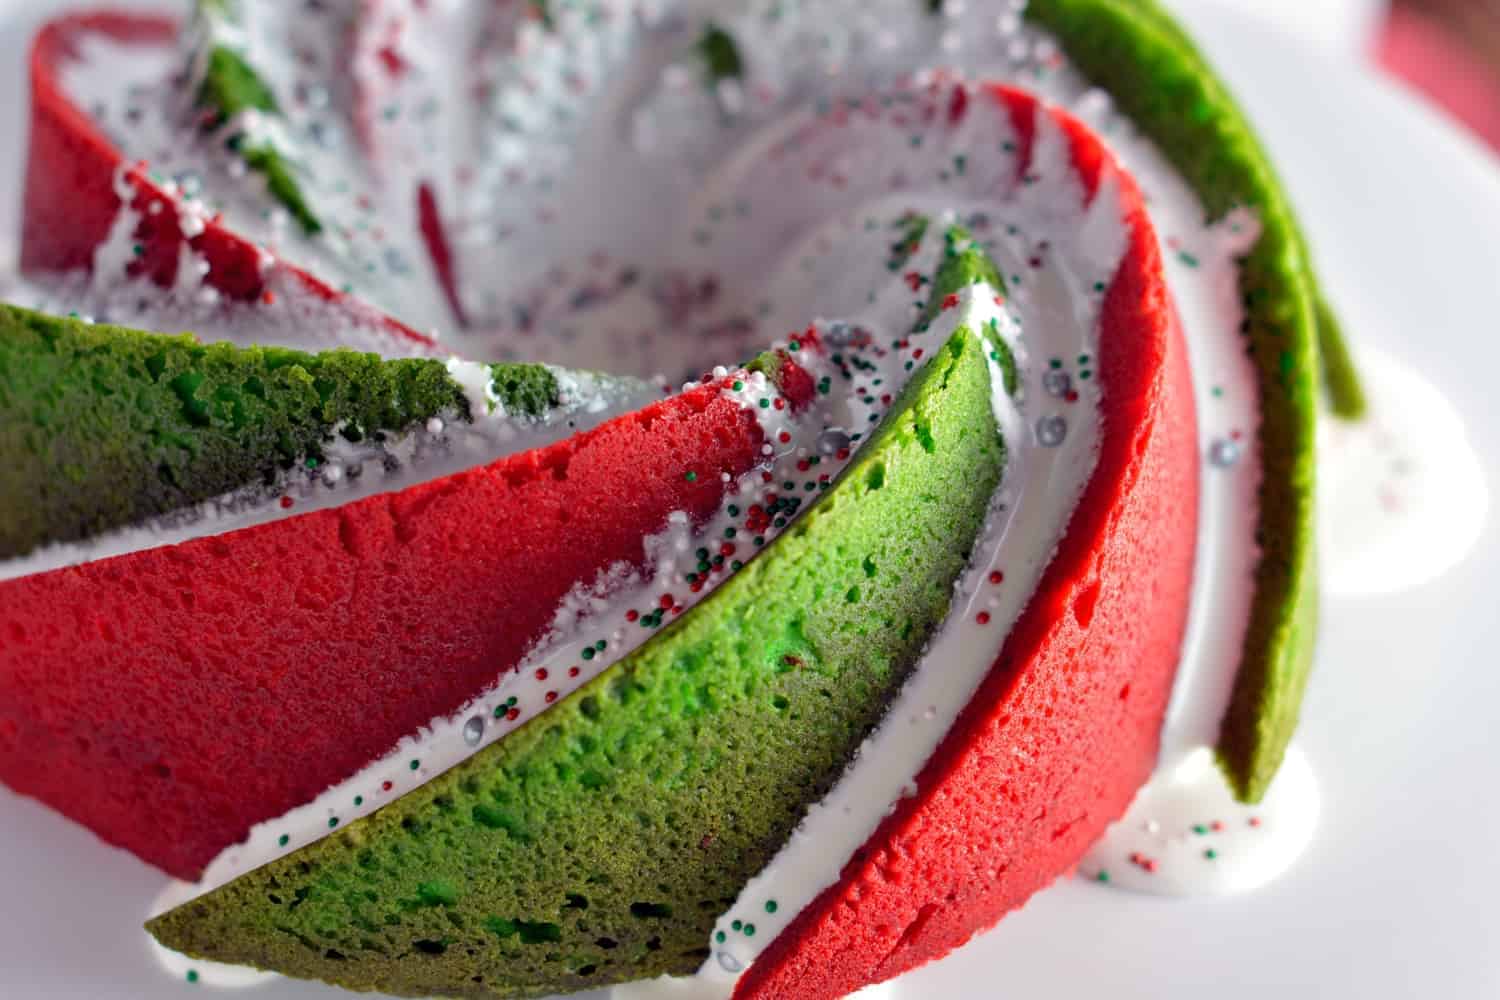 Christmas Bundt Cake is a delicious vanilla pound cake tinted with red and green swirls with a marshmallow fluff icing. Make this show stopping cake today! #bundtcakerecipes #christmascakes www.savoryexperiments.com 